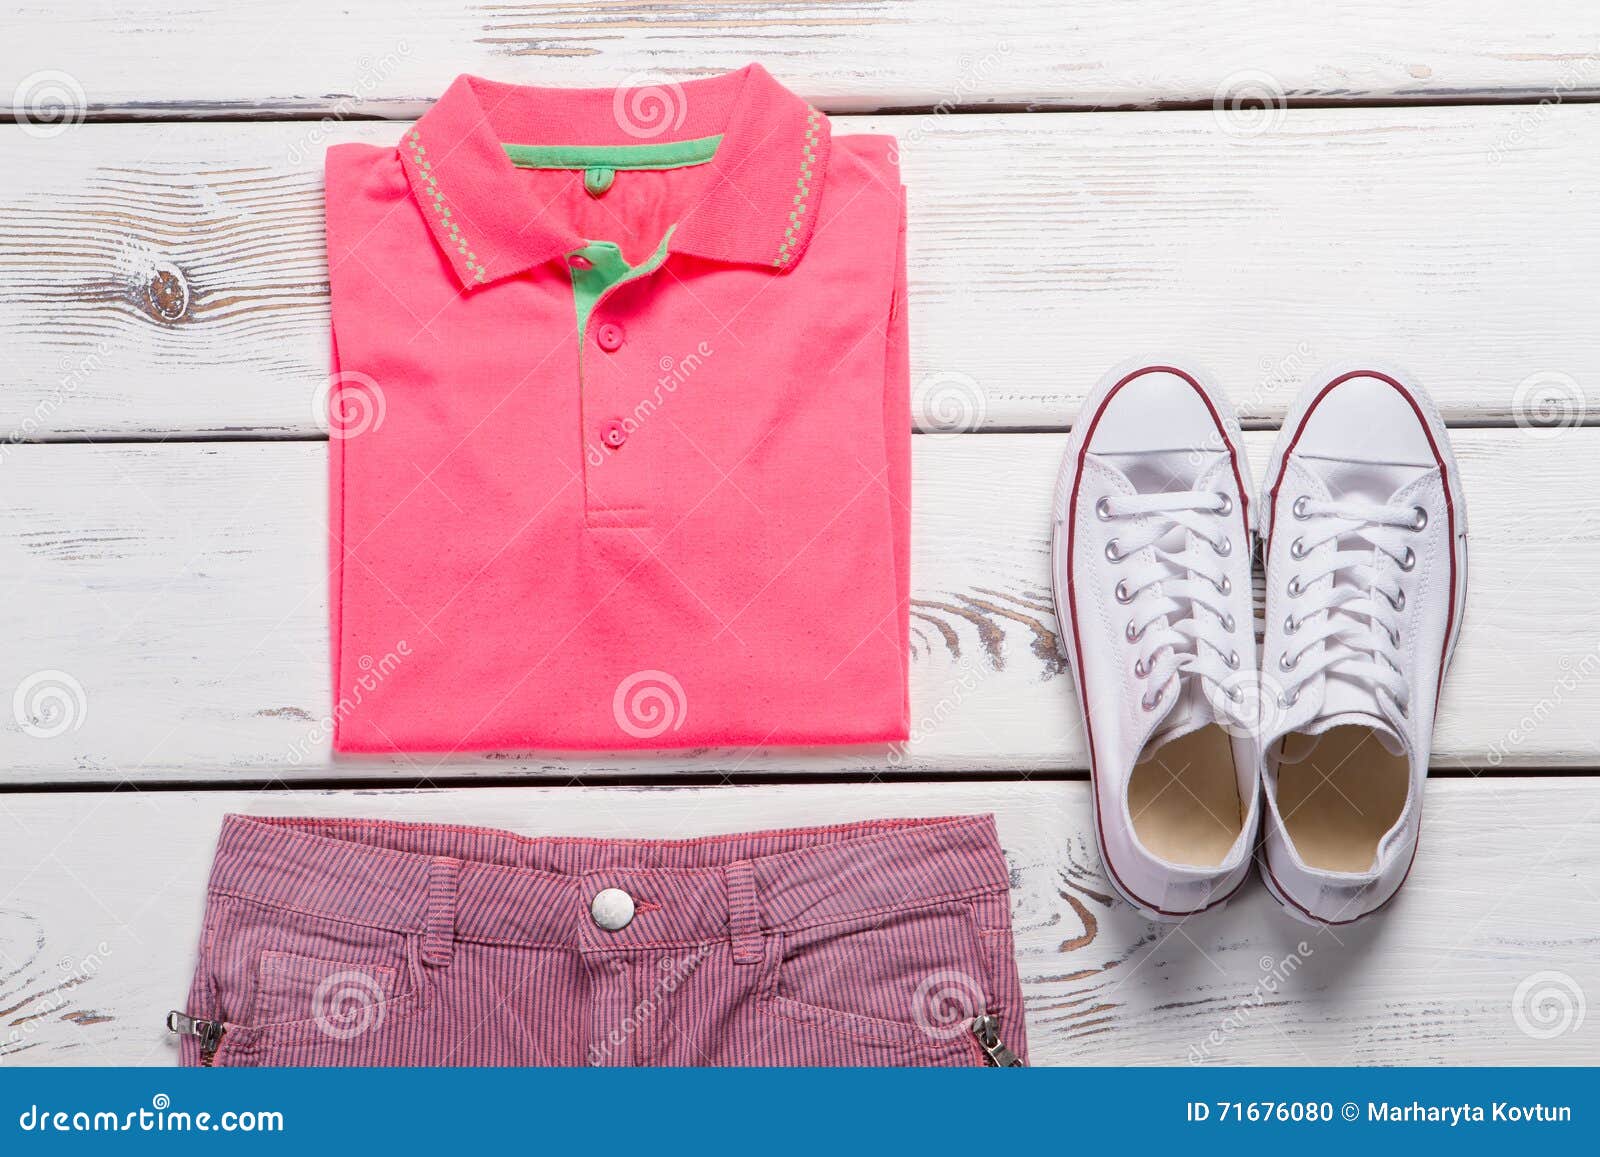 Pink Polo Shirt and Shorts. Stock Photo - Image of design, gift: 71676080